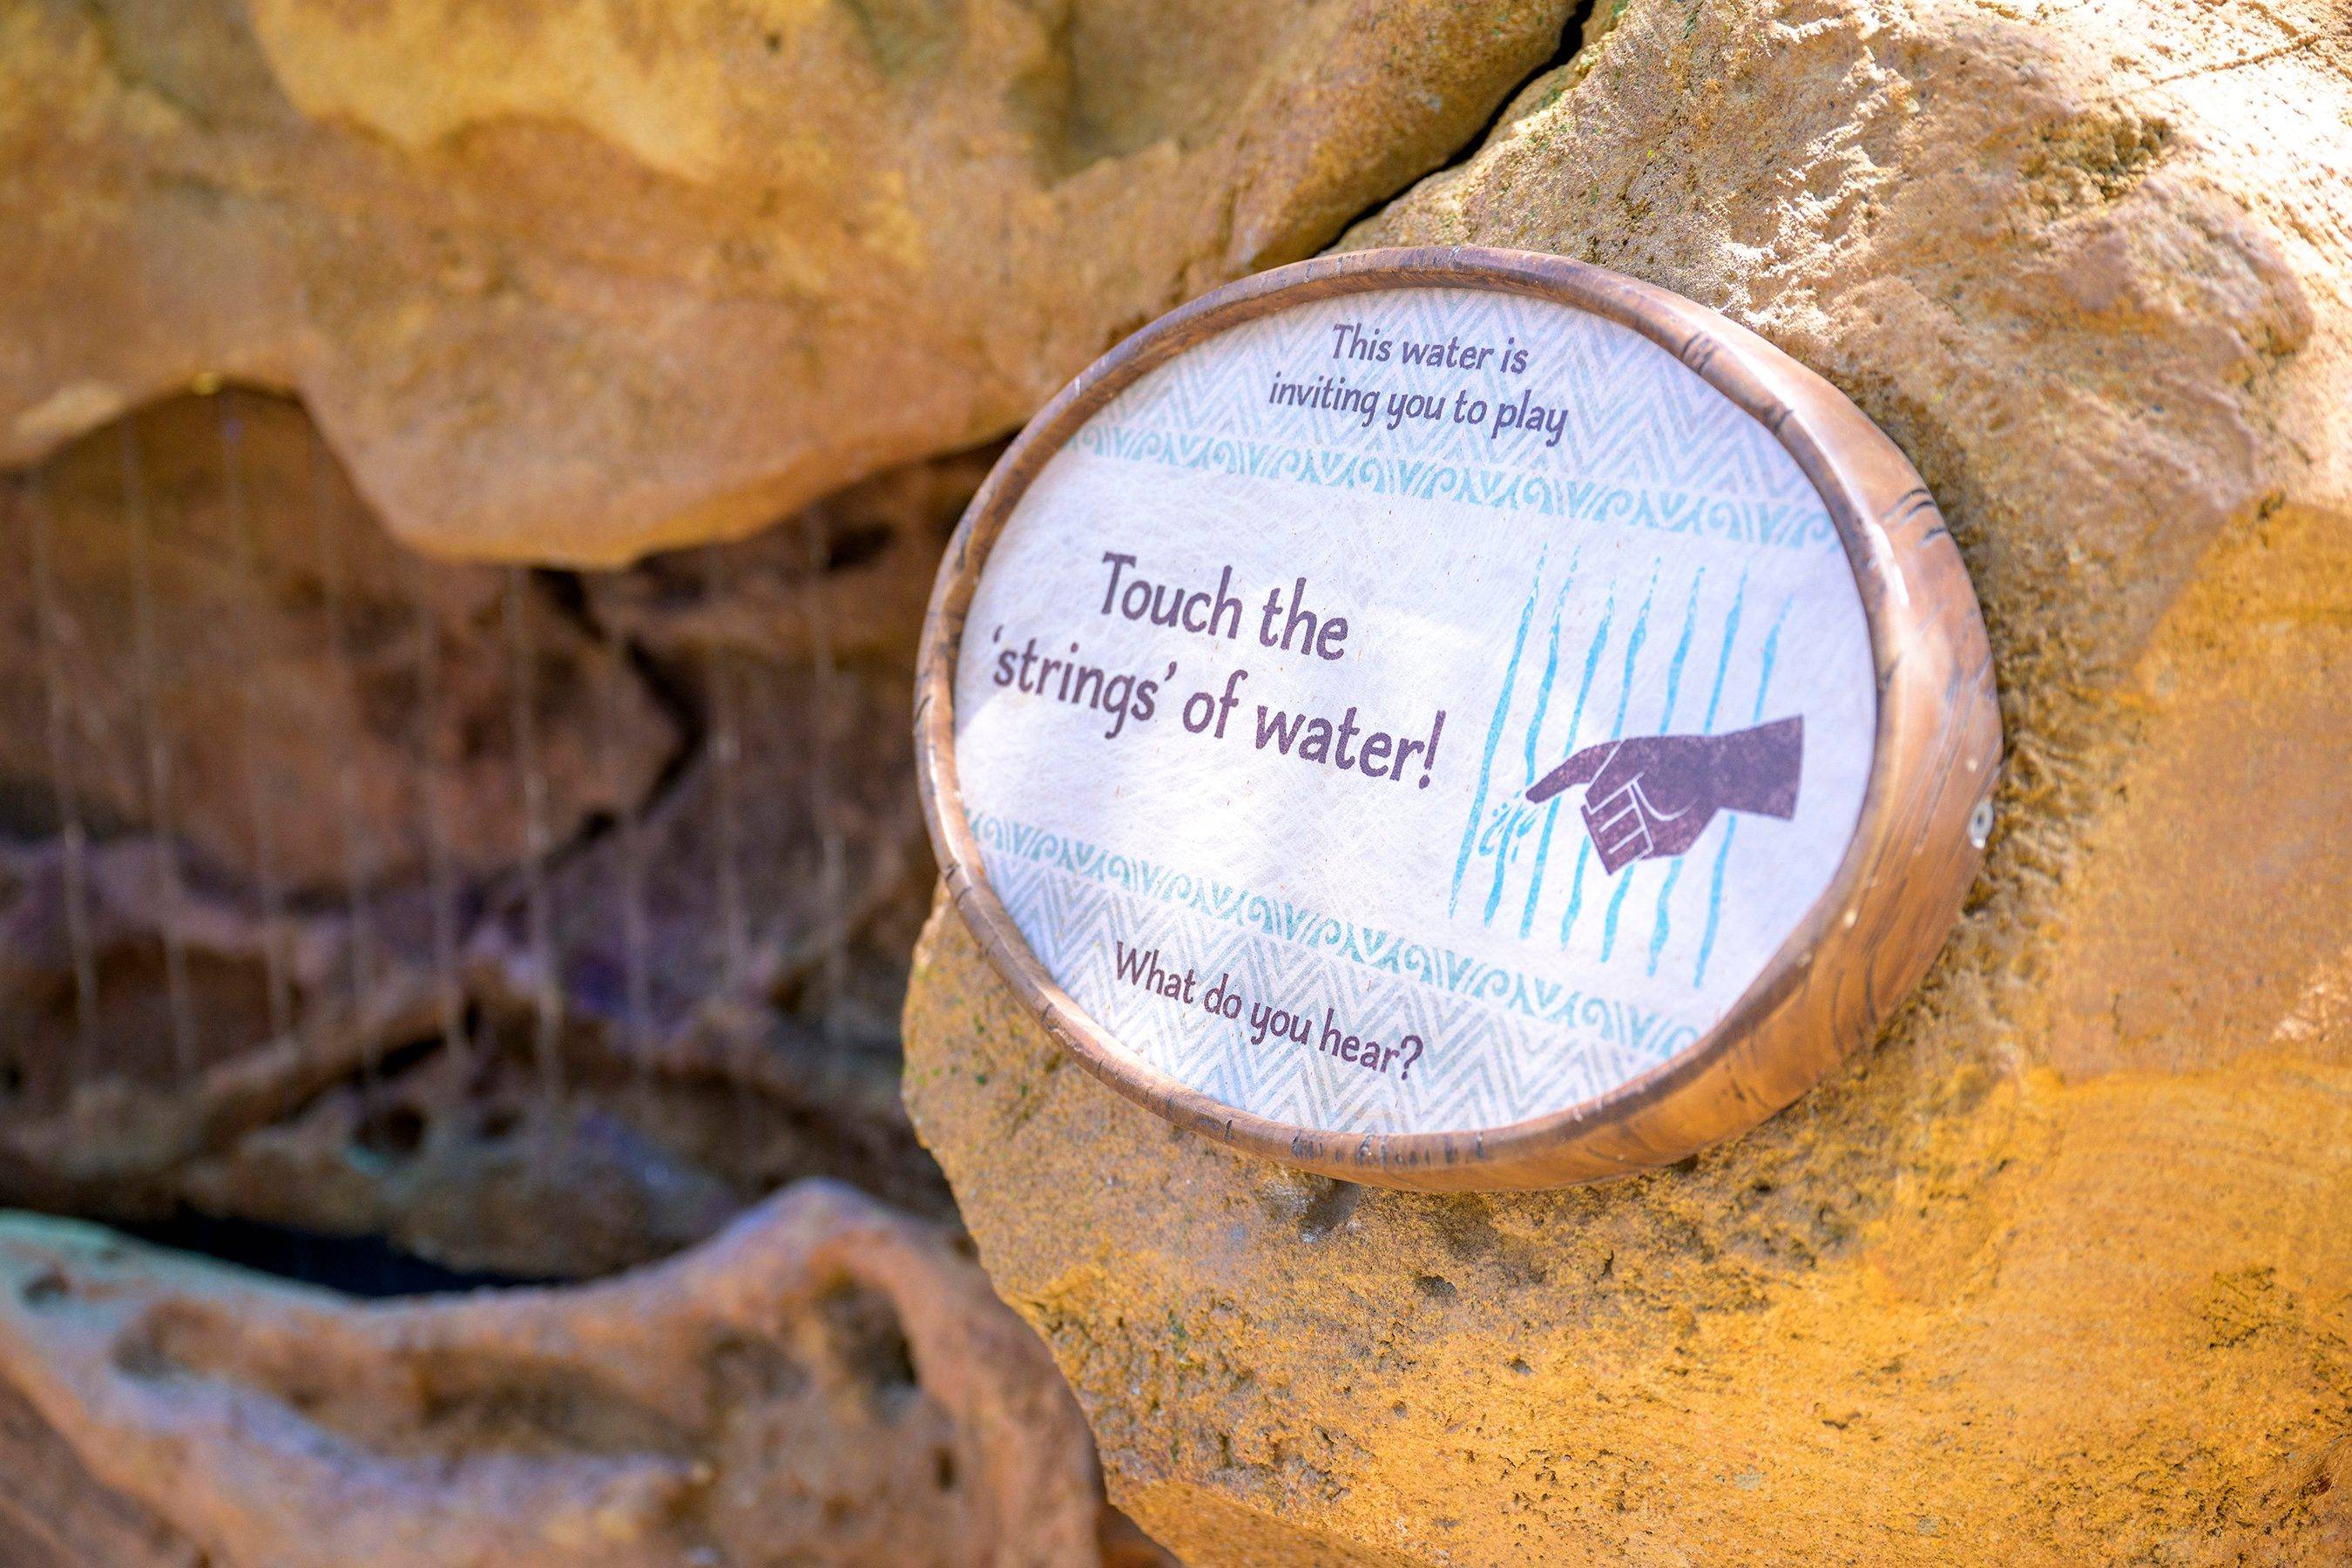 VIDEO - Water is flowing at  EPCOT's Journey of Water Inspired by Moana